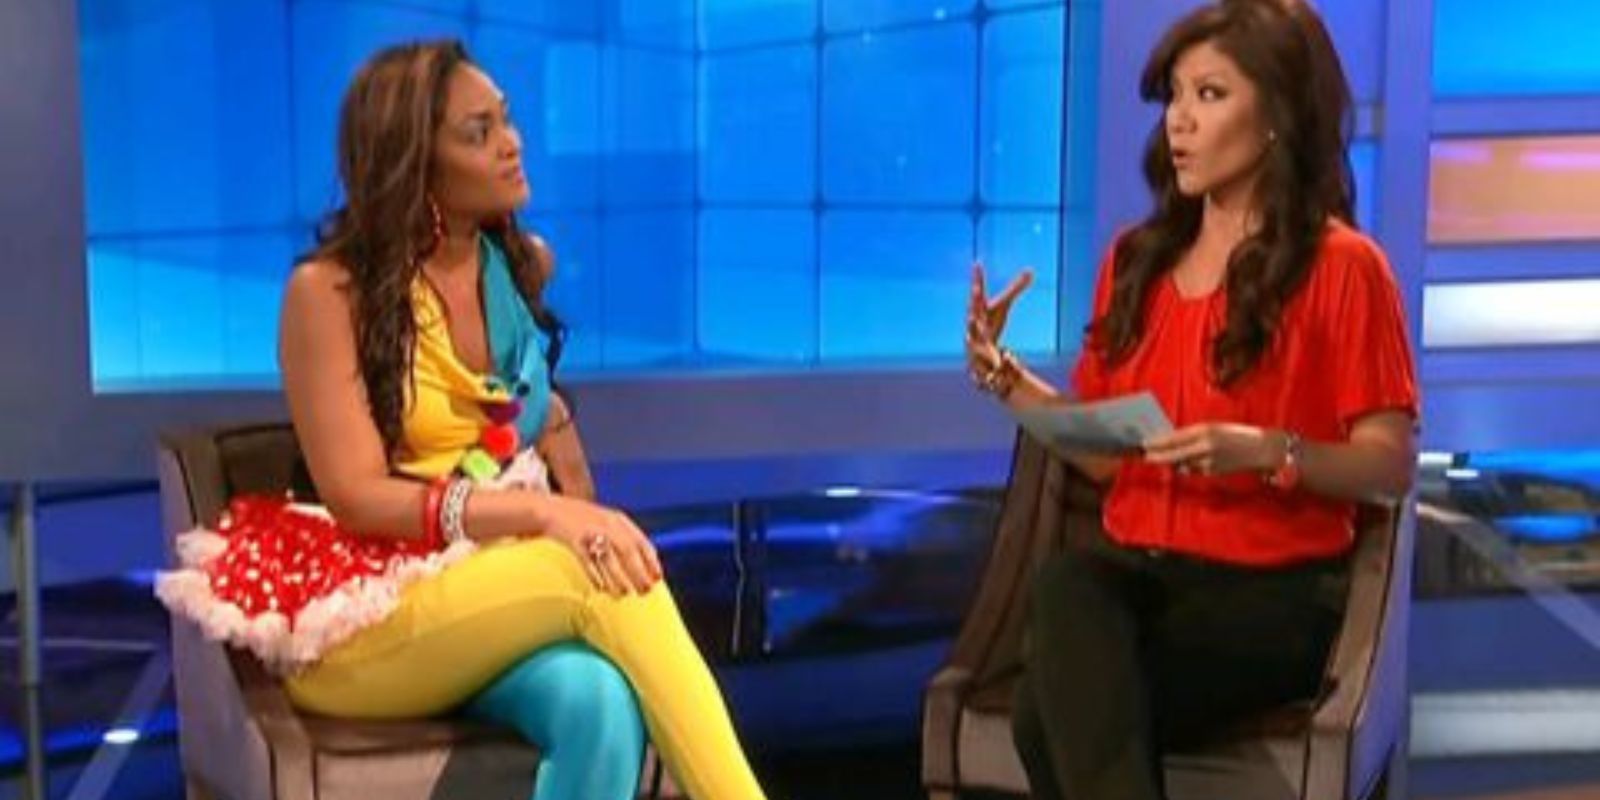 Candice sits with Julie on her eviction night wearing clowntard